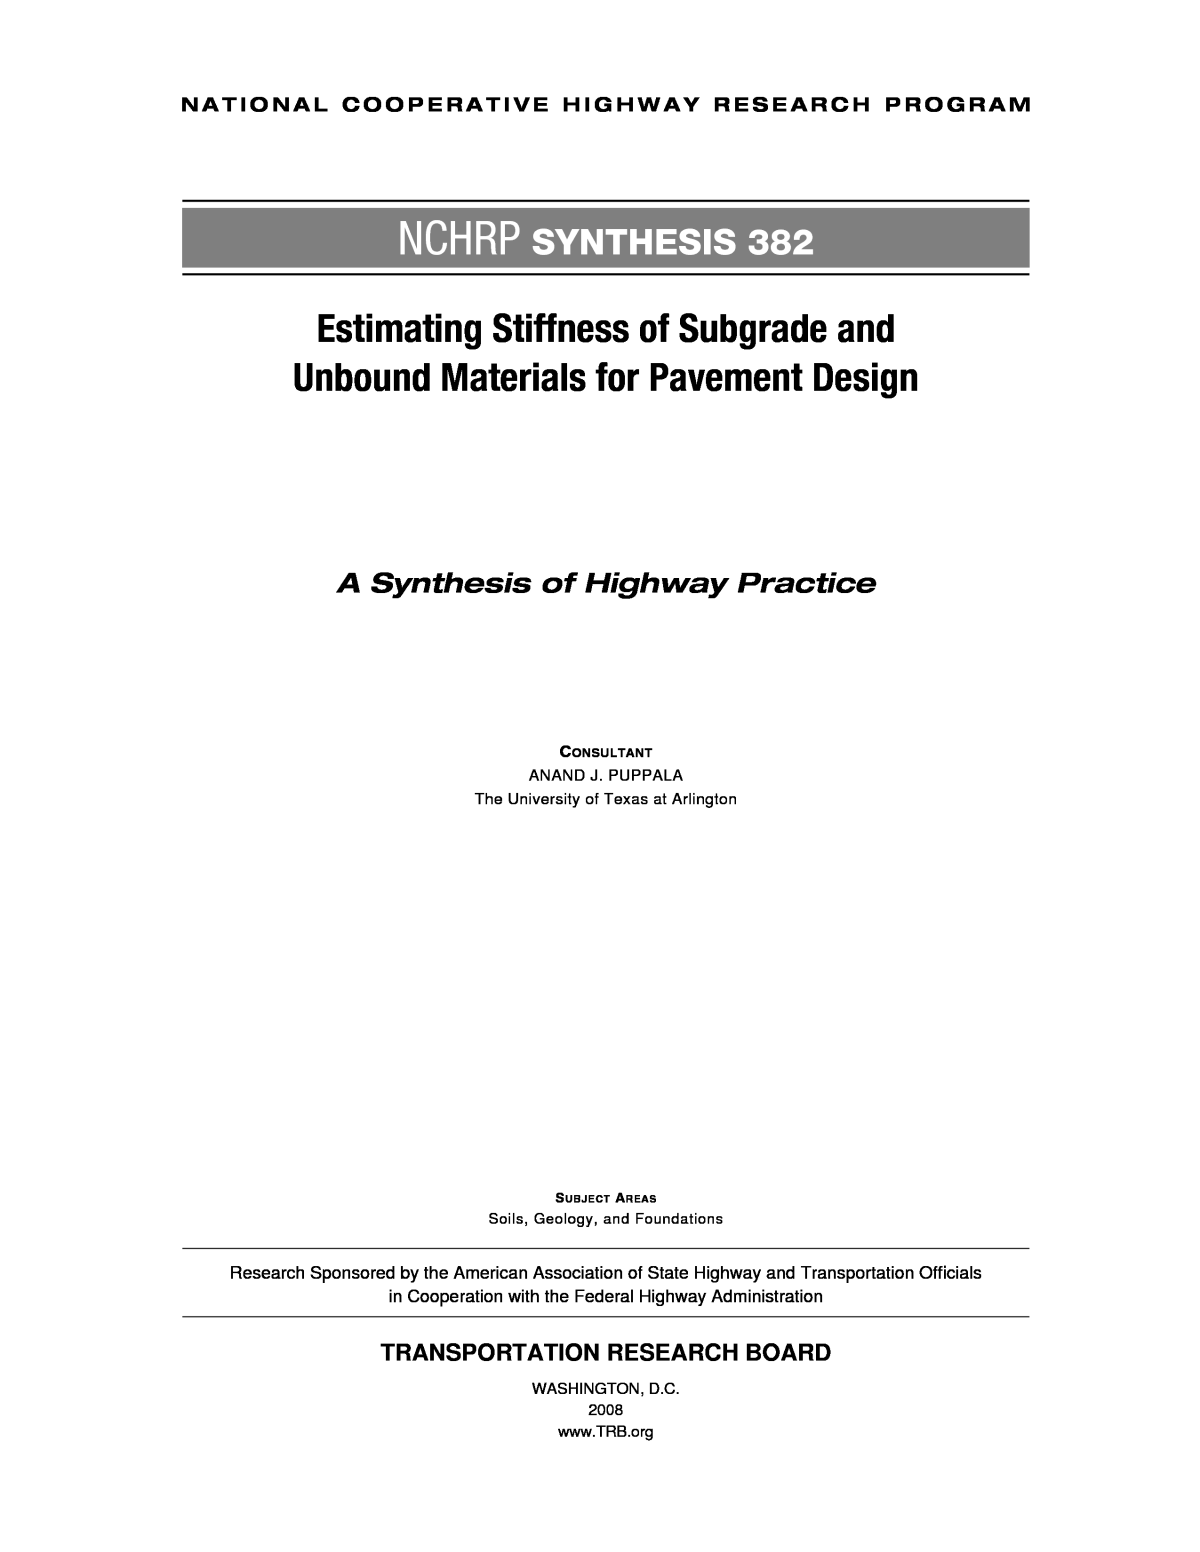 Press | of Estimating National Academies Matter Materials Design Front Pavement Unbound | The Subgrade Stiffness for and